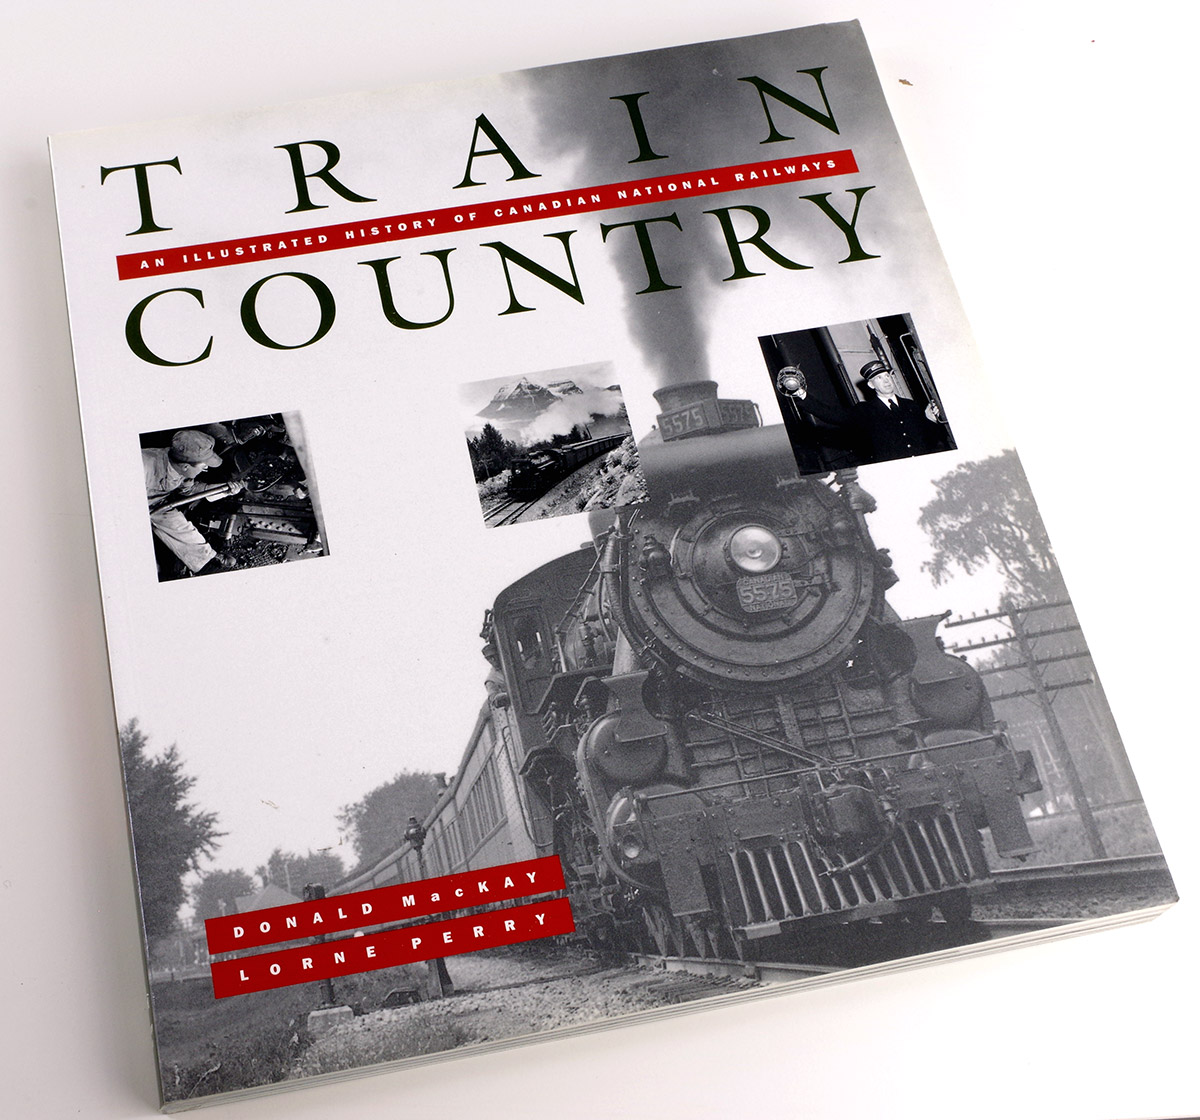  Train Country: An Illustrated History of Canadian National Railways  в продаже